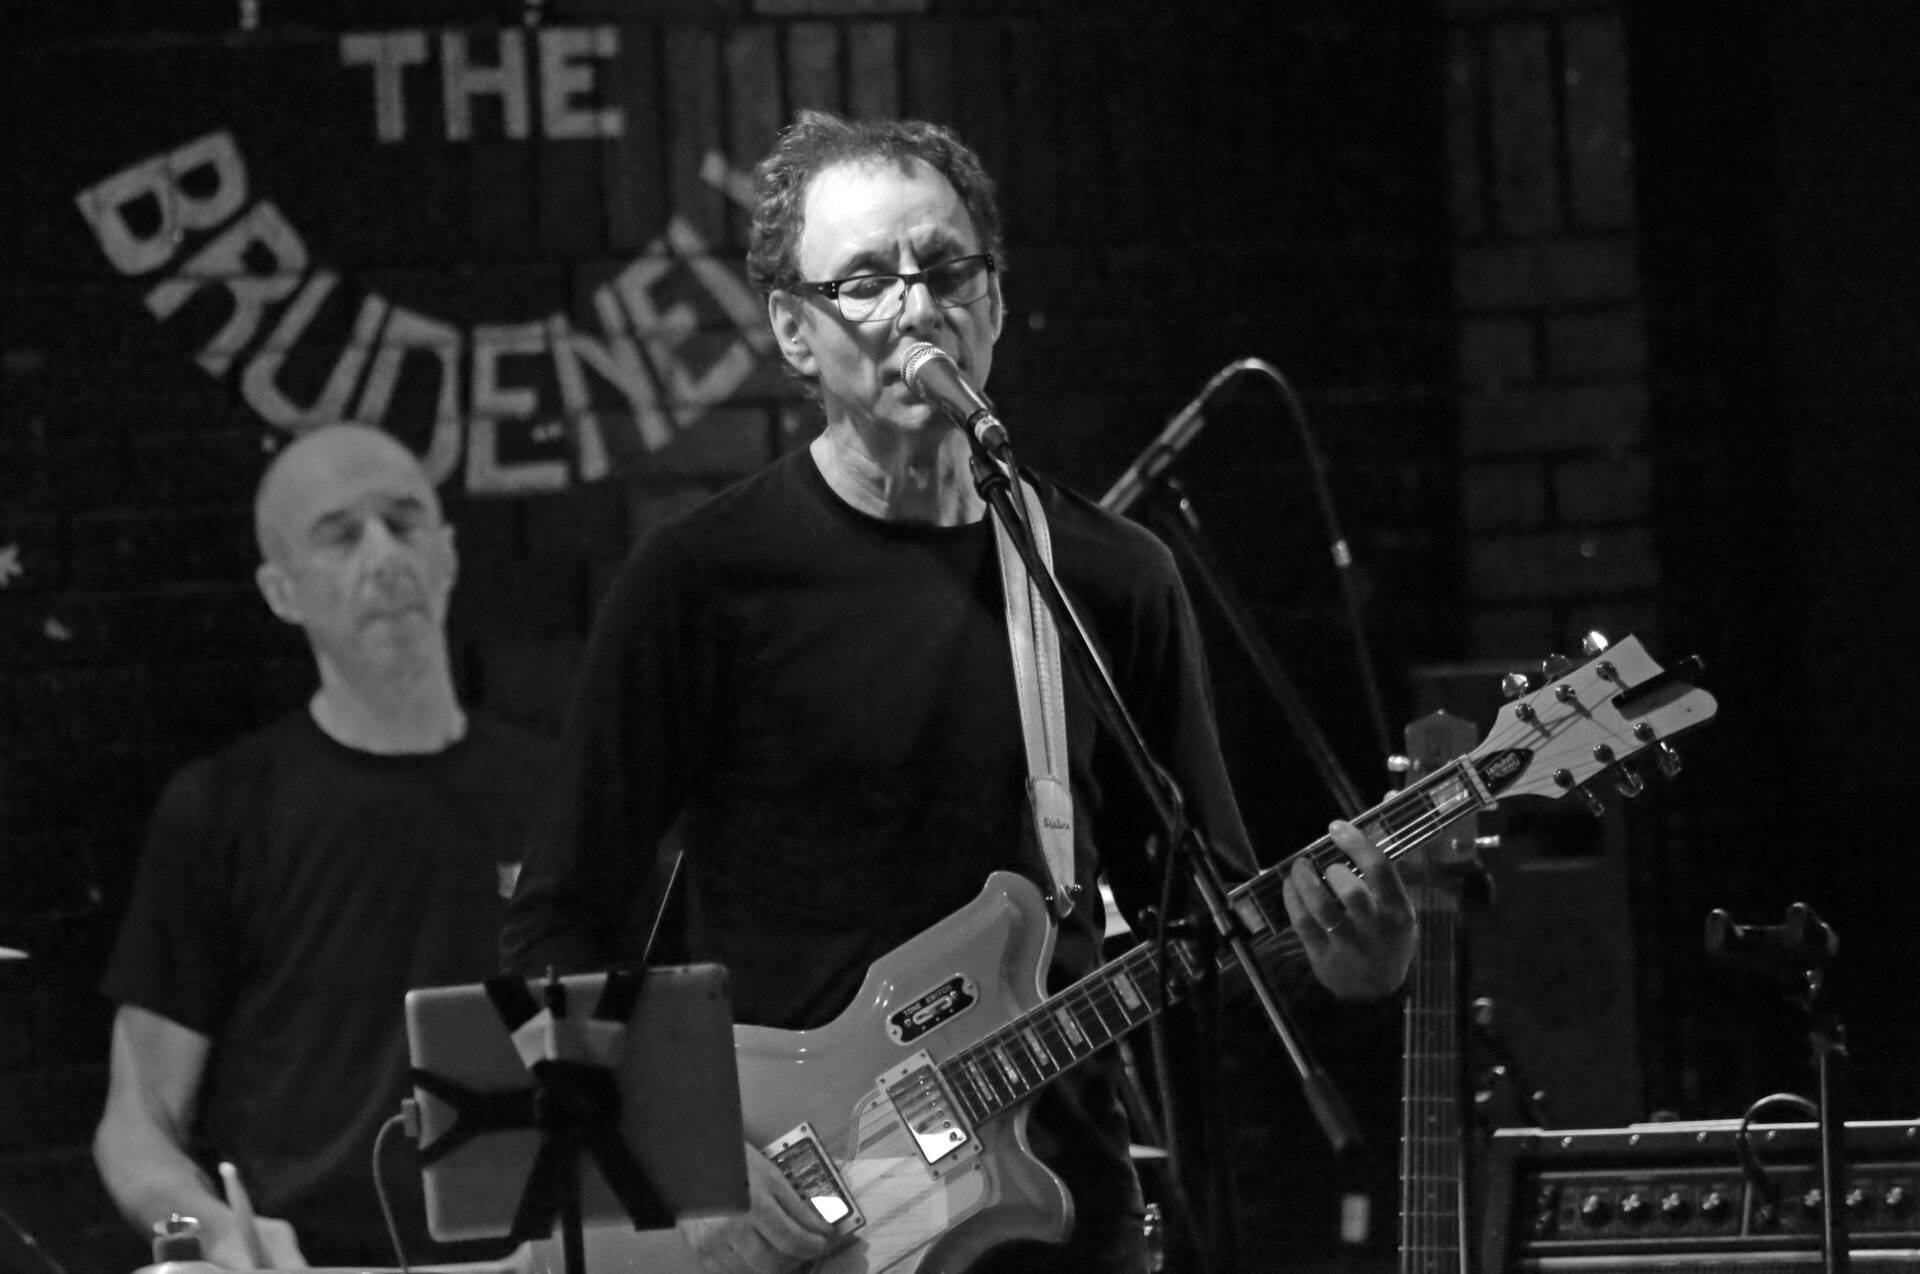 Wire + PINS – Brudenell Social Club, Leeds, 28th April 2015 1